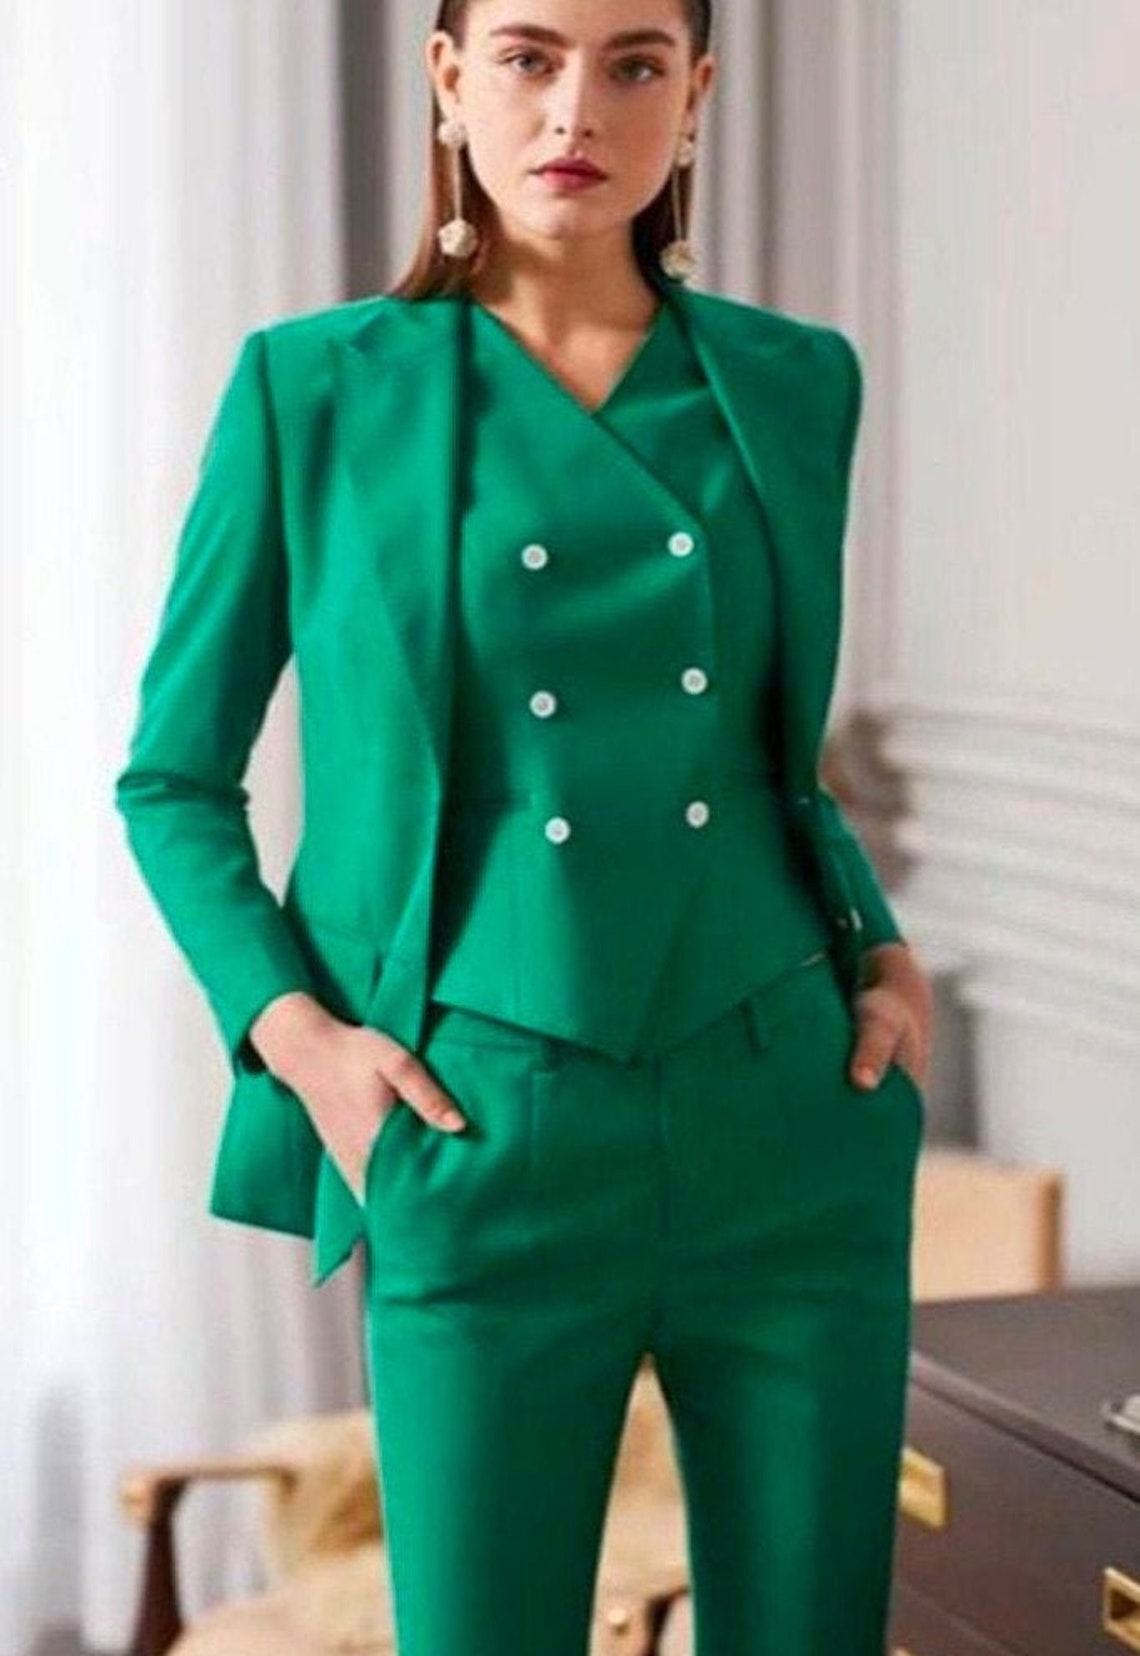 Womens Suits Green 3 Piece Suits Wedding Slim Fit Suits 2 | Etsy